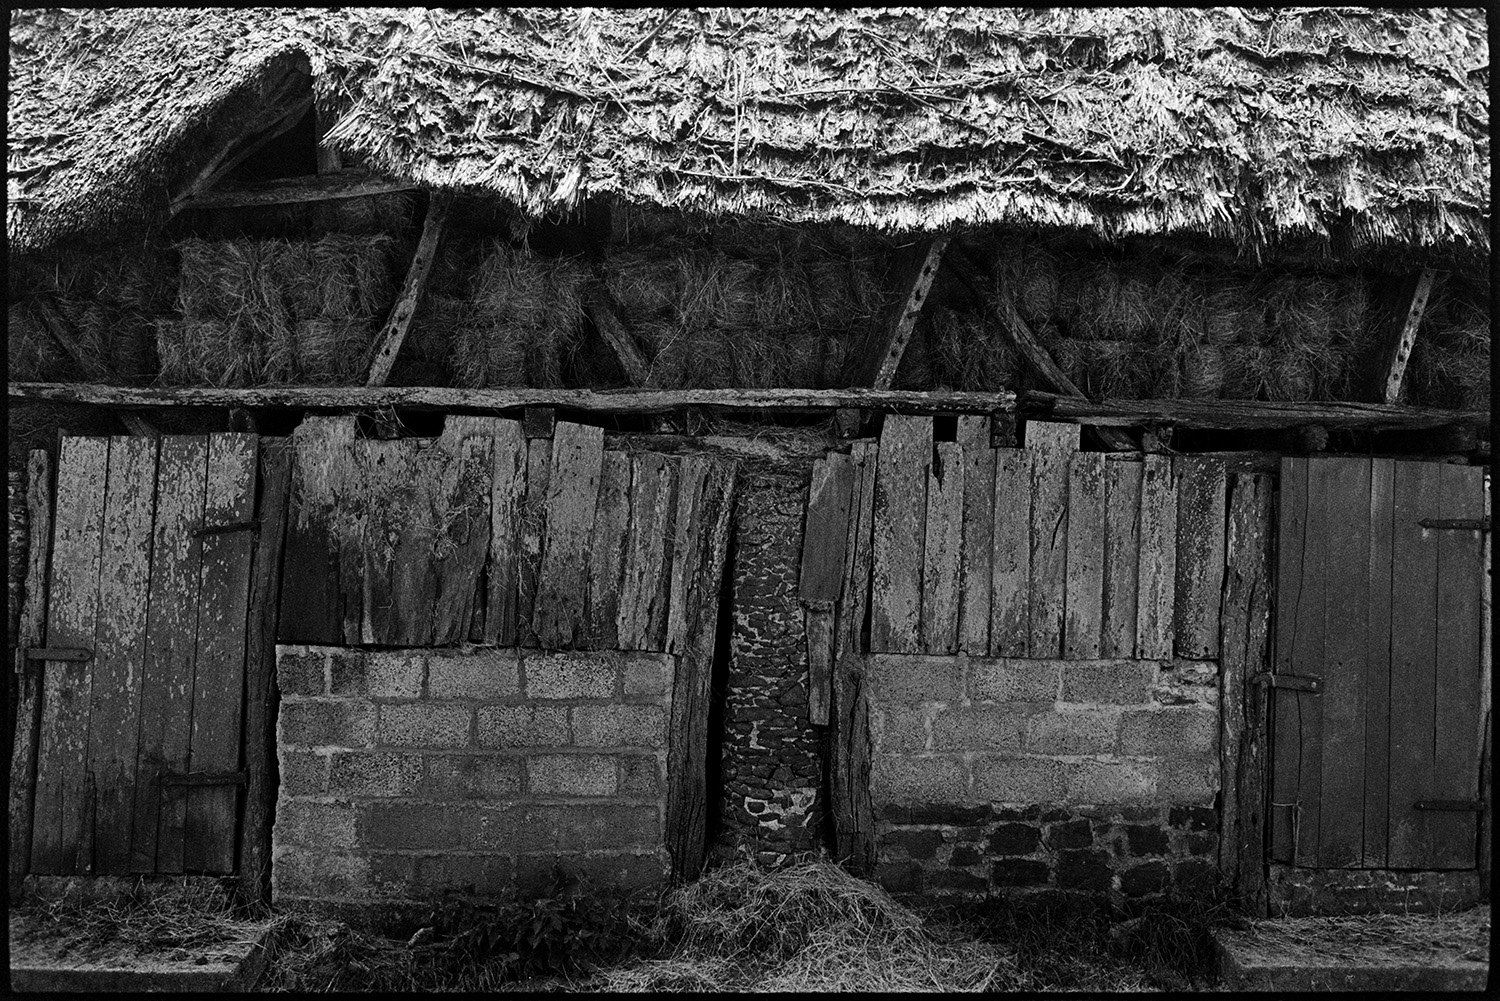 Ancient thatched barn full of hay. 
[Hay bales stored in a thatched barn at Deckport, Hatherleigh. The walls of the barn are made from stone pillars, wooden planks and breeze blocks.]